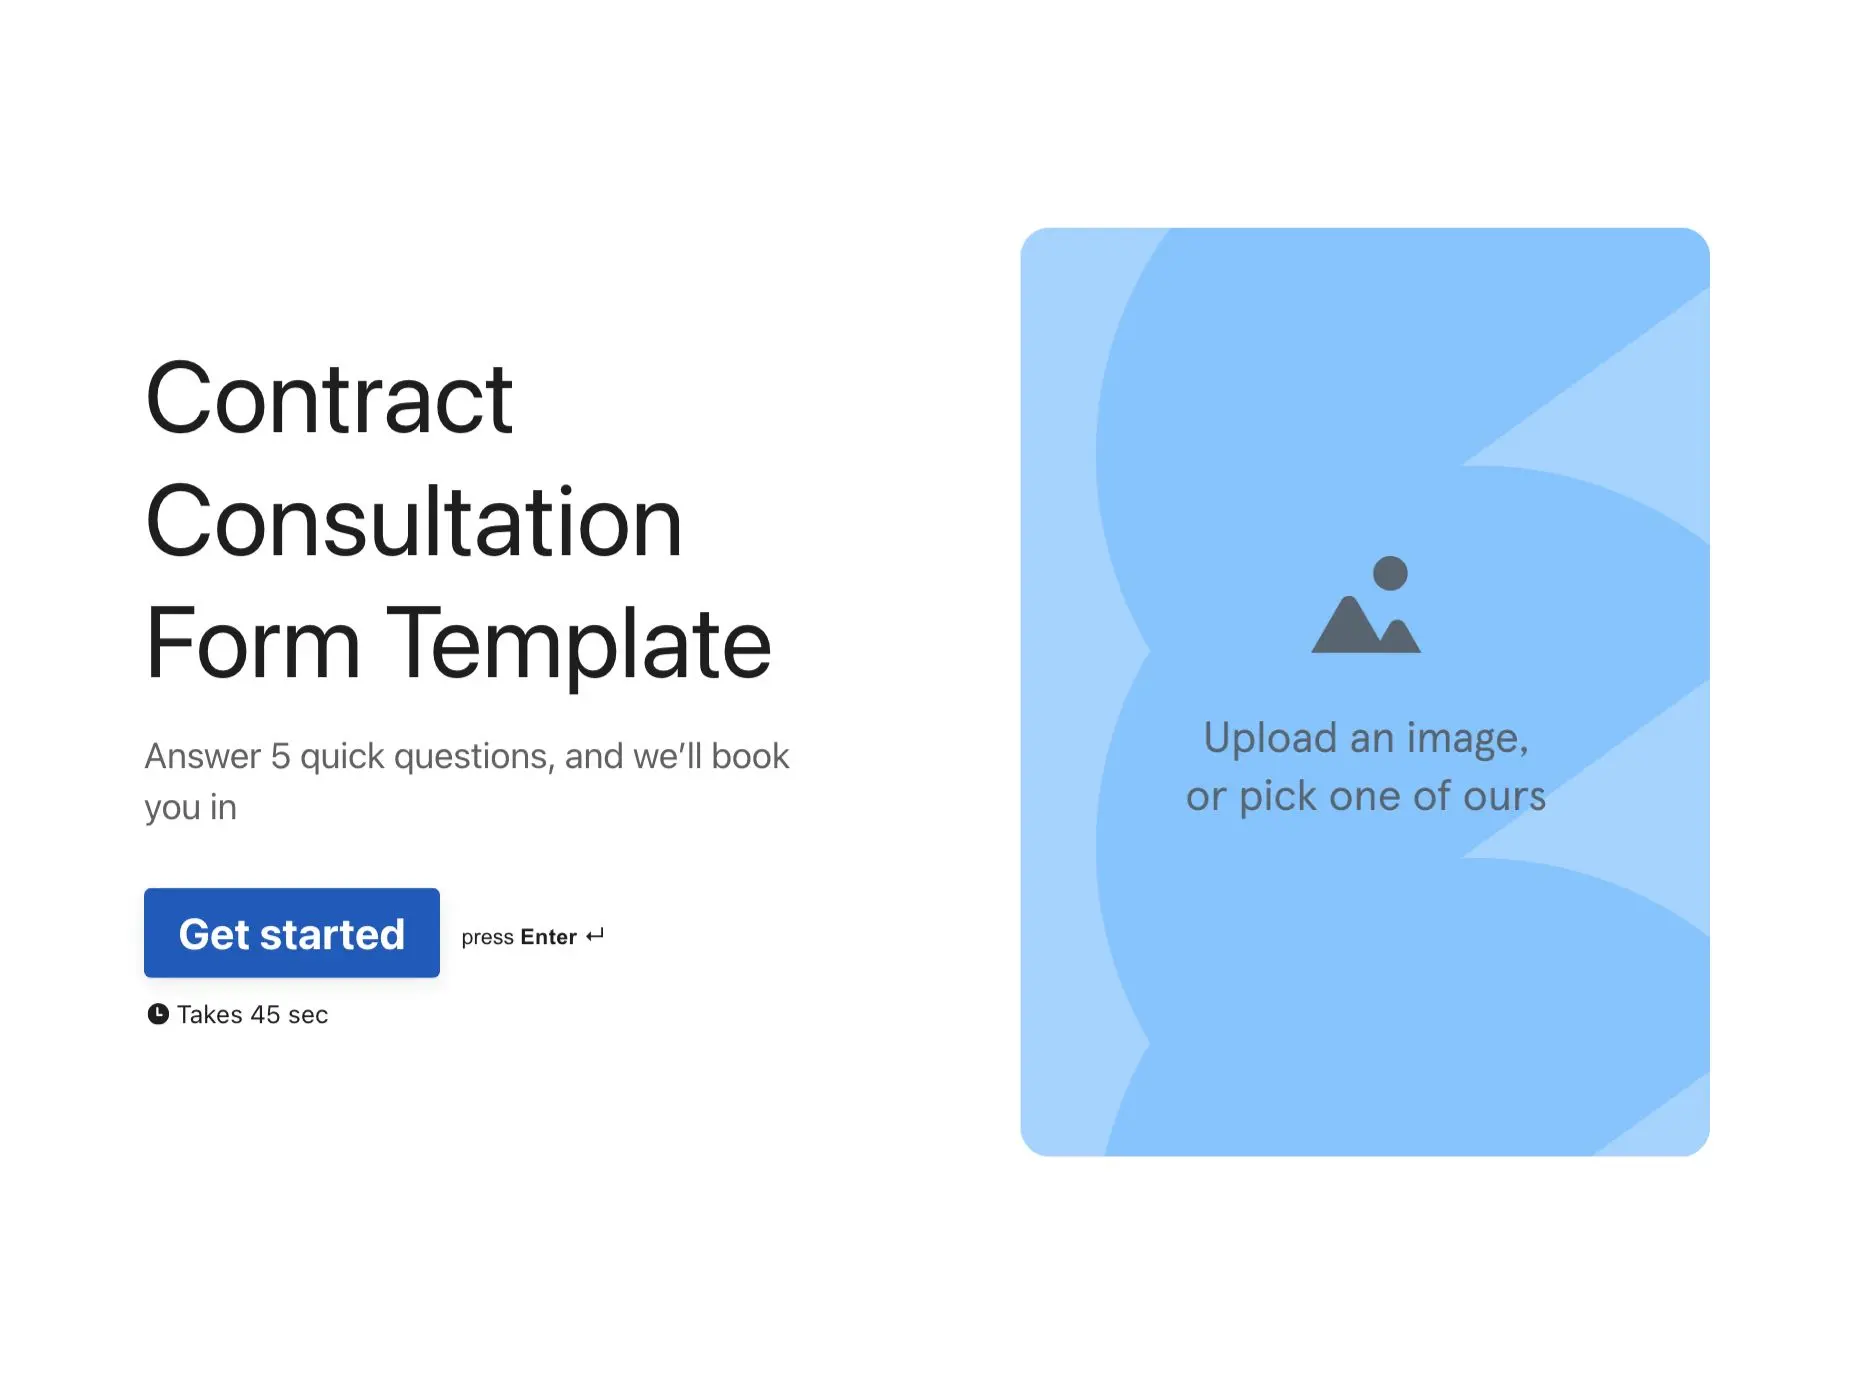 Contract Consultation Form Template Hero